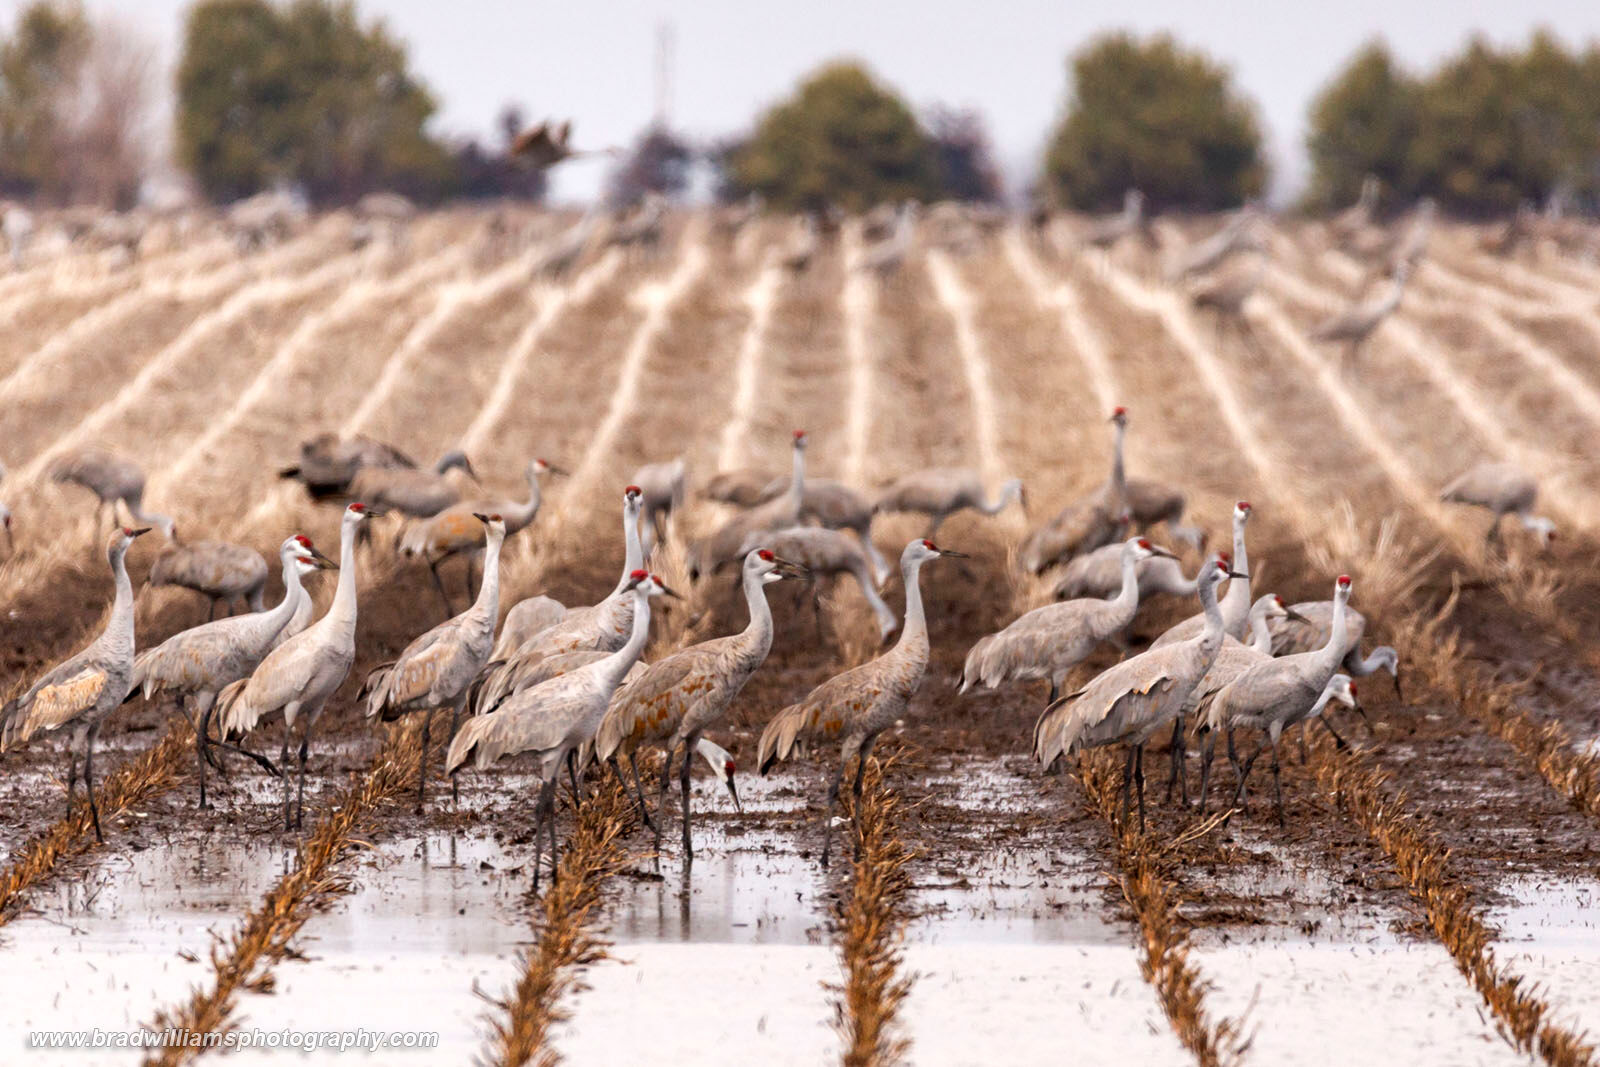 A group of Sandhill Cranes in a flooded corn field.